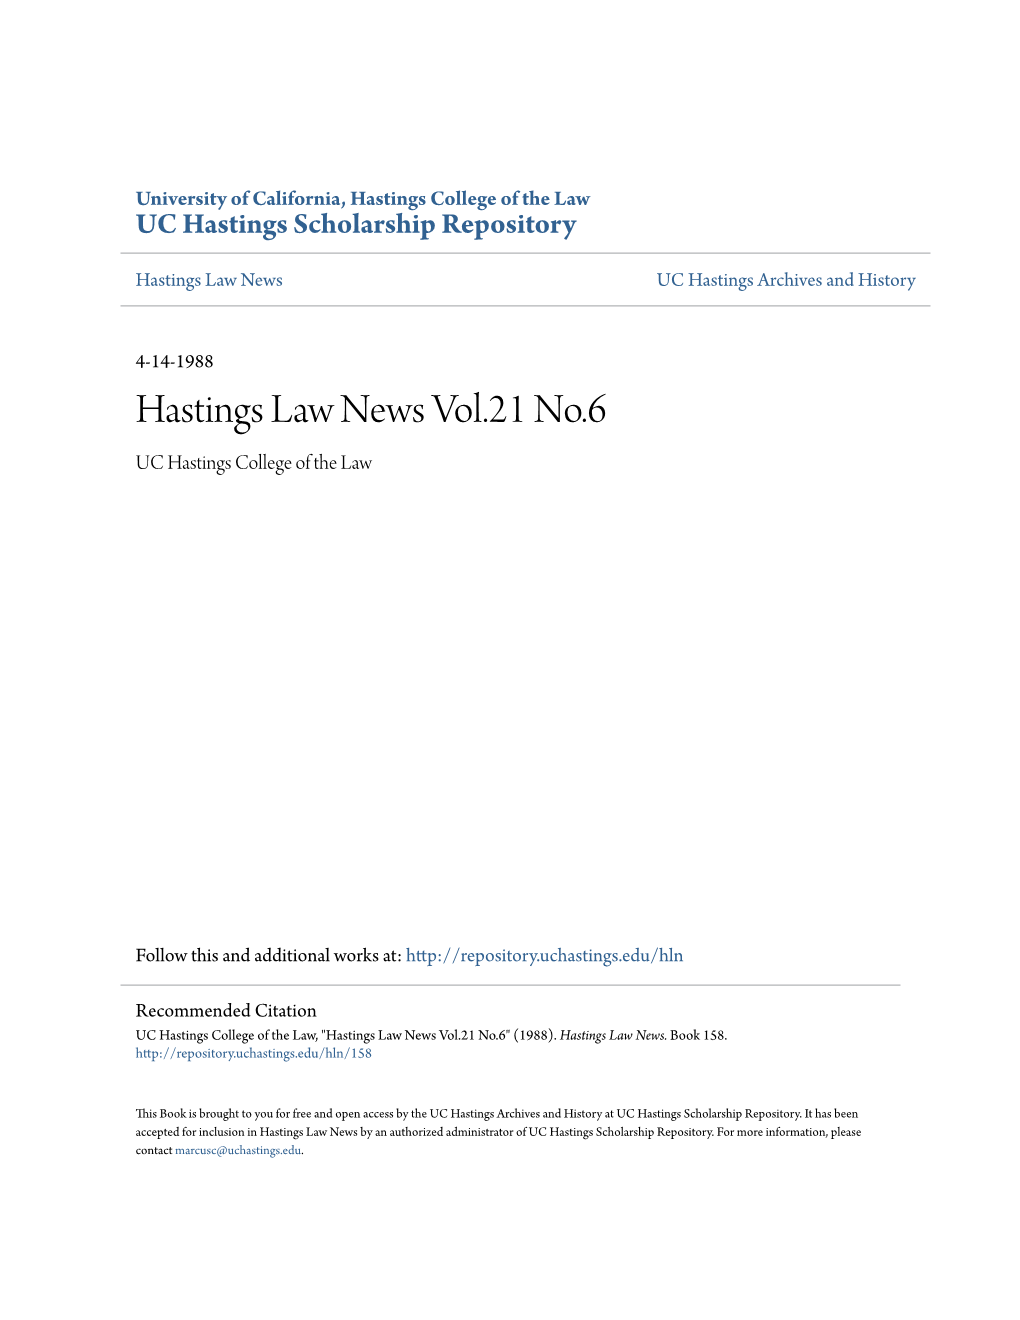 Hastings Law News Vol.21 No.6 UC Hastings College of the Law